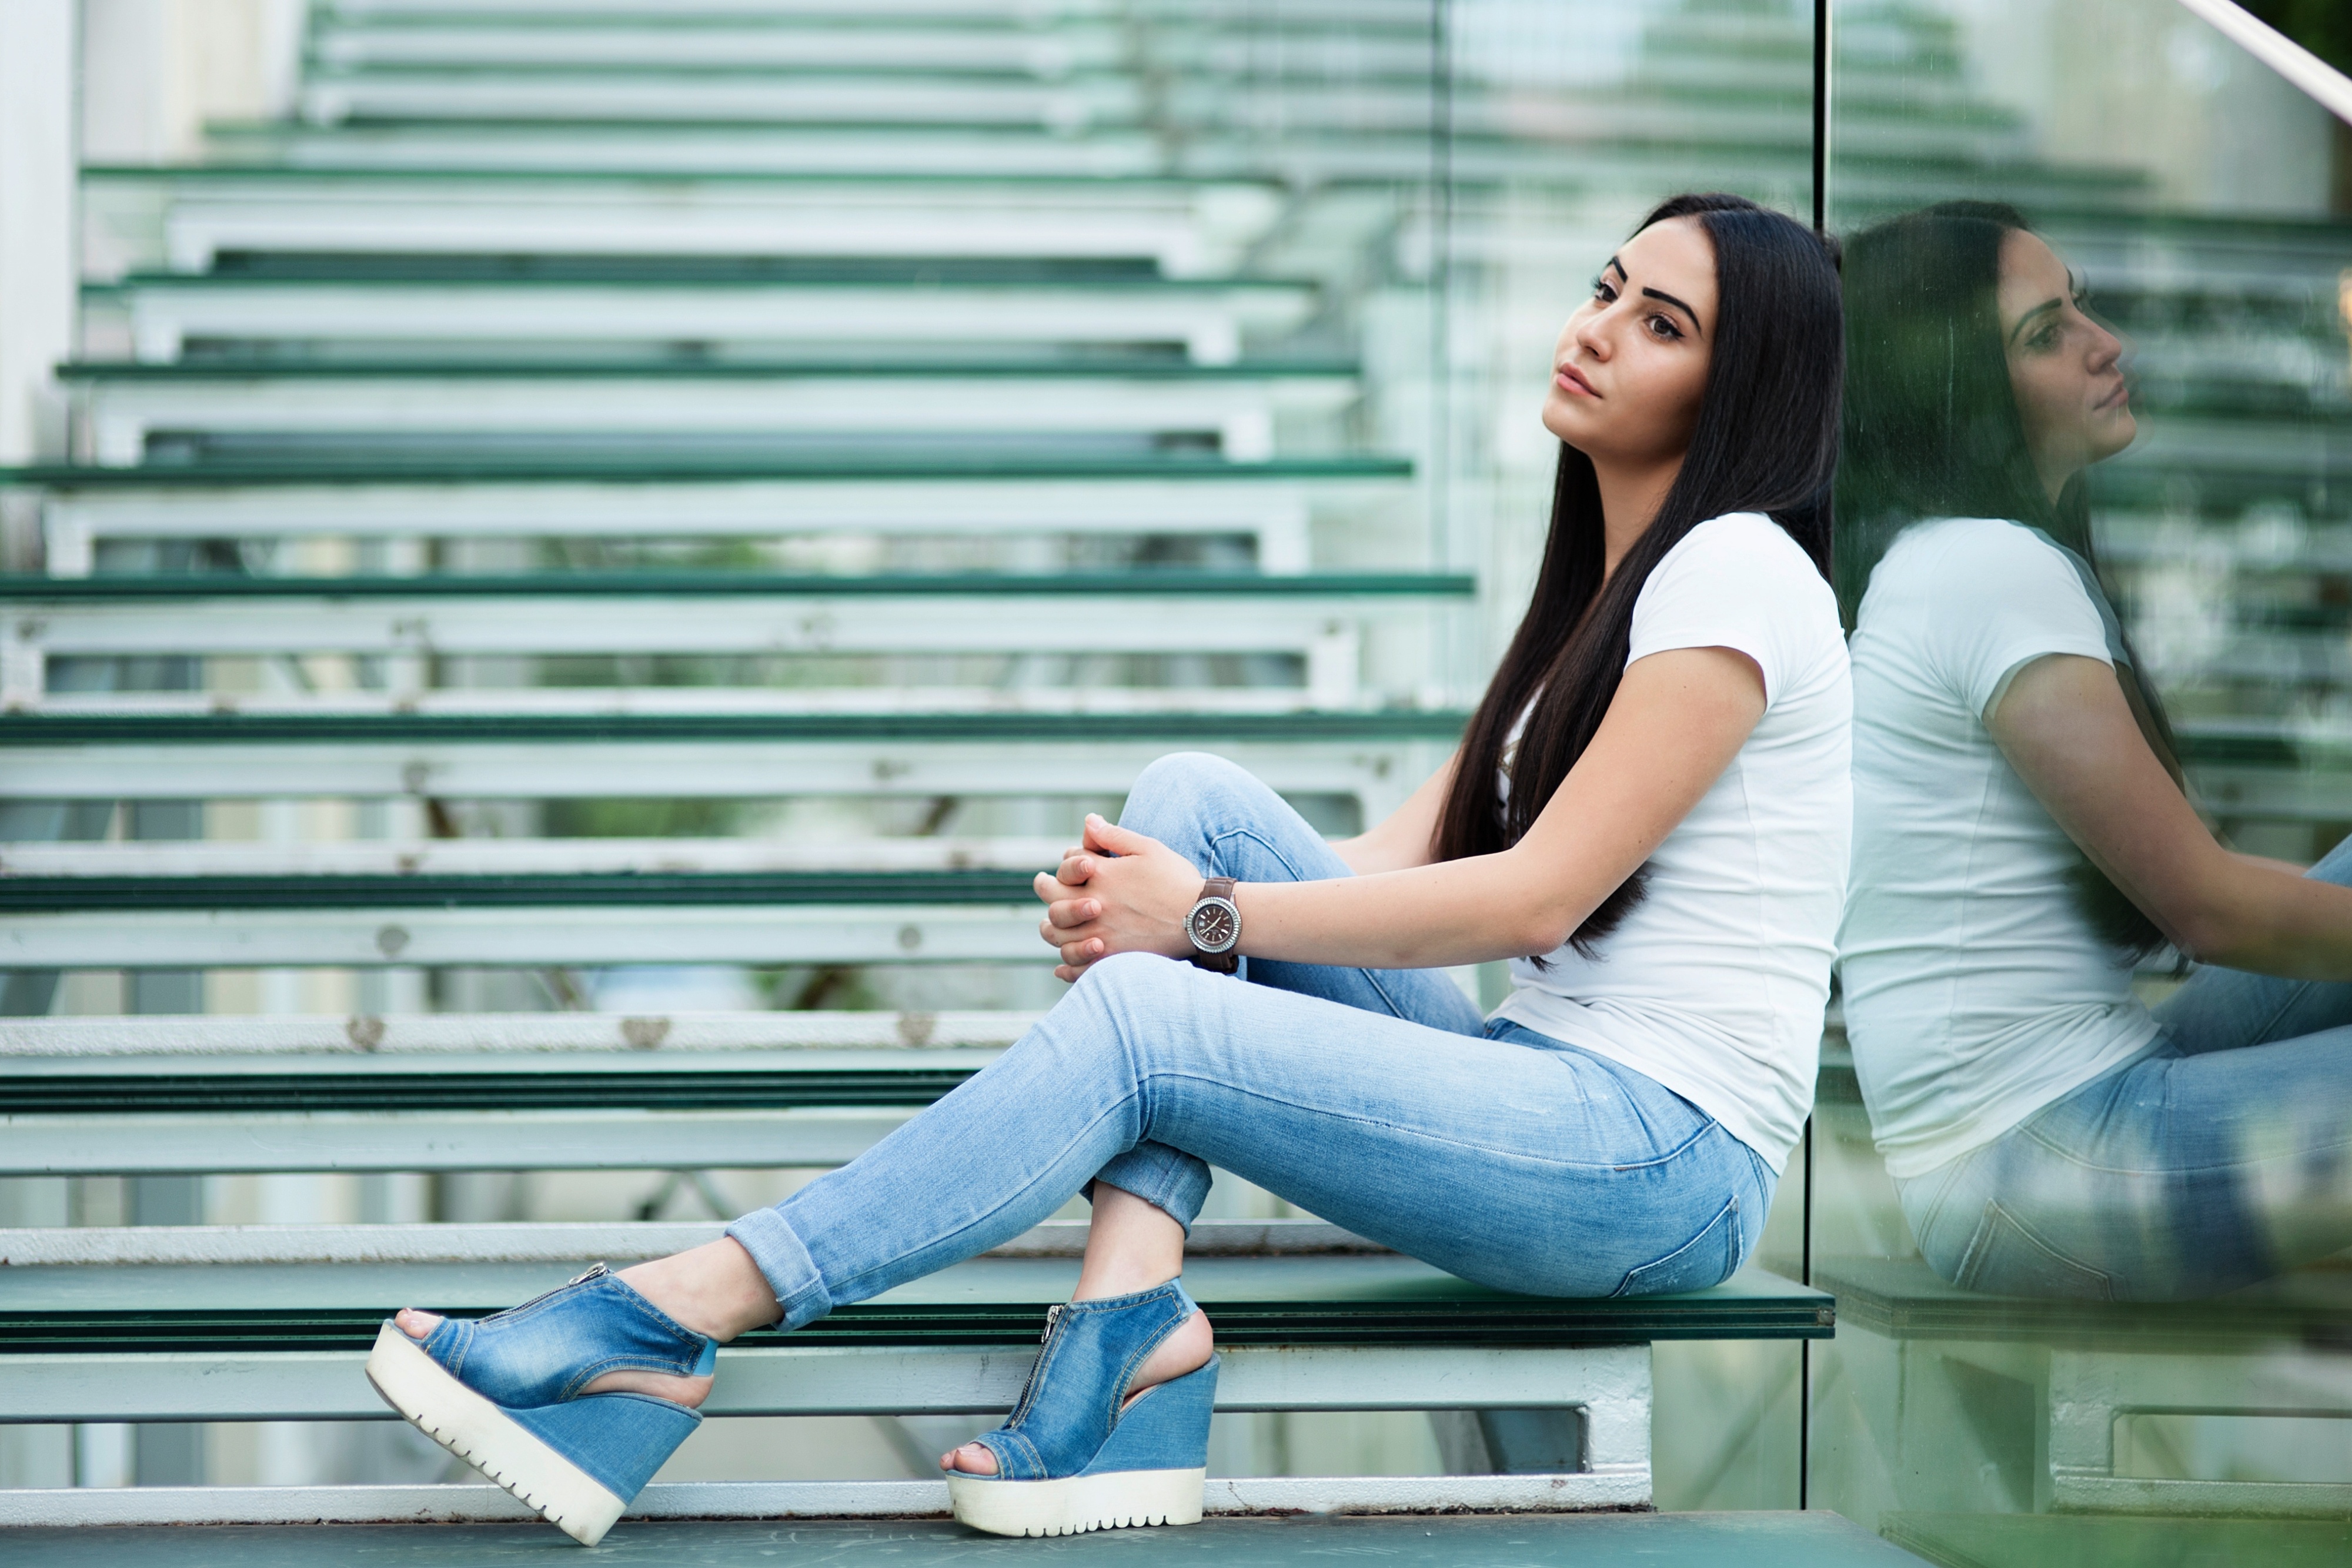 People 4000x2667 model women red lipstick sitting white t-shirt jeans reflection dark hair shoes hand on leg stairs women outdoors T-shirt white tops toes feet